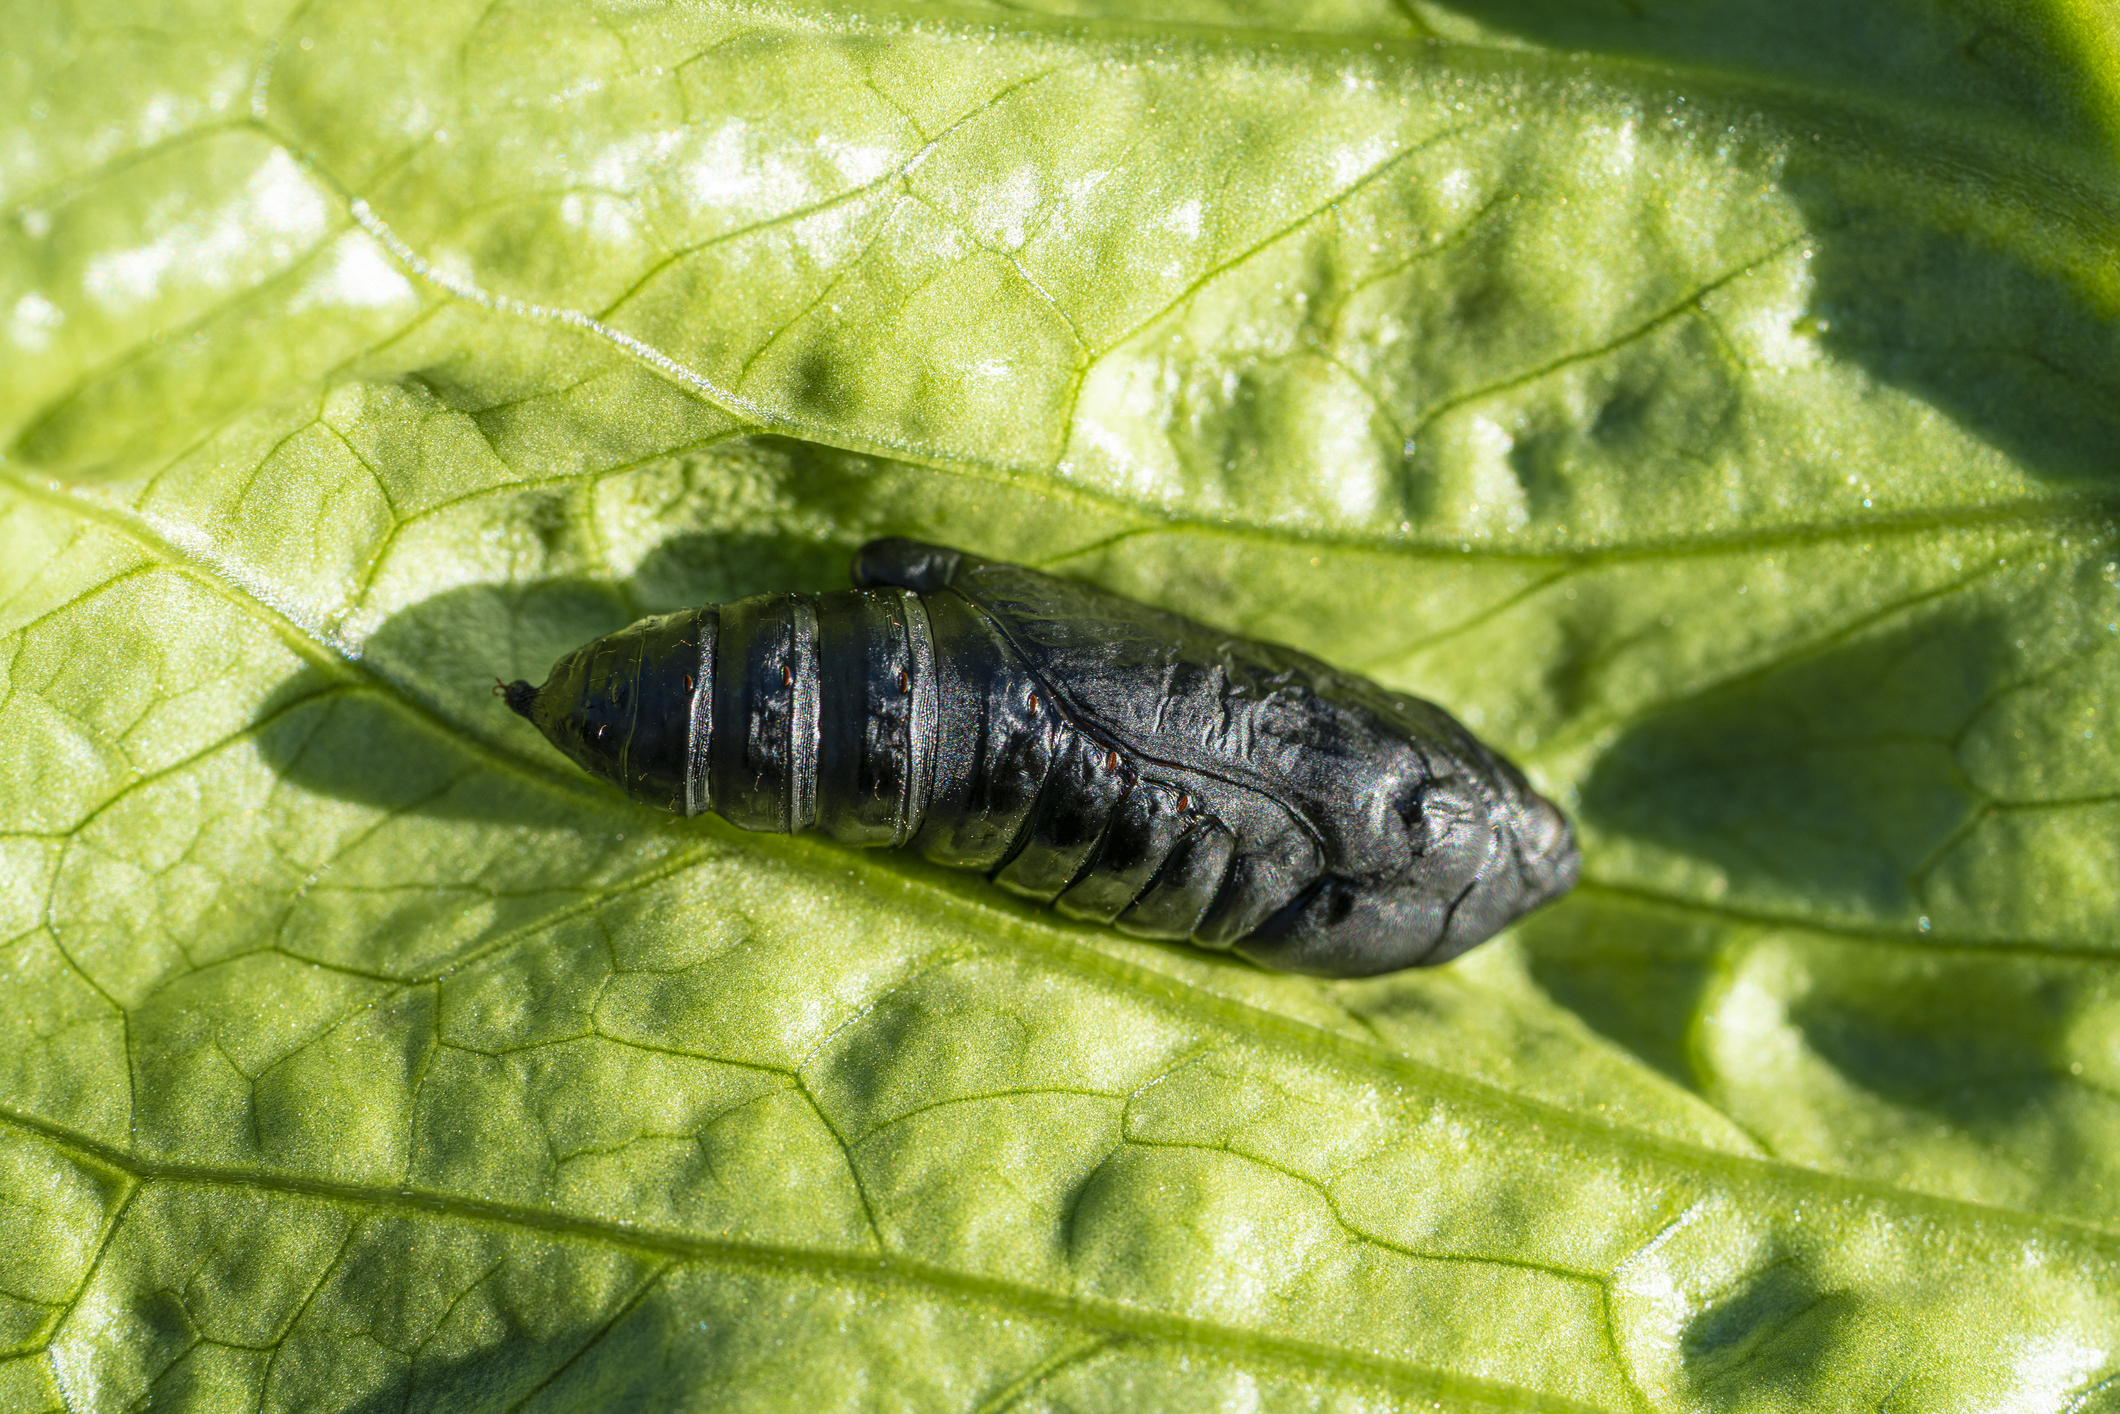 As the planting season gets underway, corn growers must be vigilant against a common pest, the black cutworm, which poses a significant risk to young corn crops.